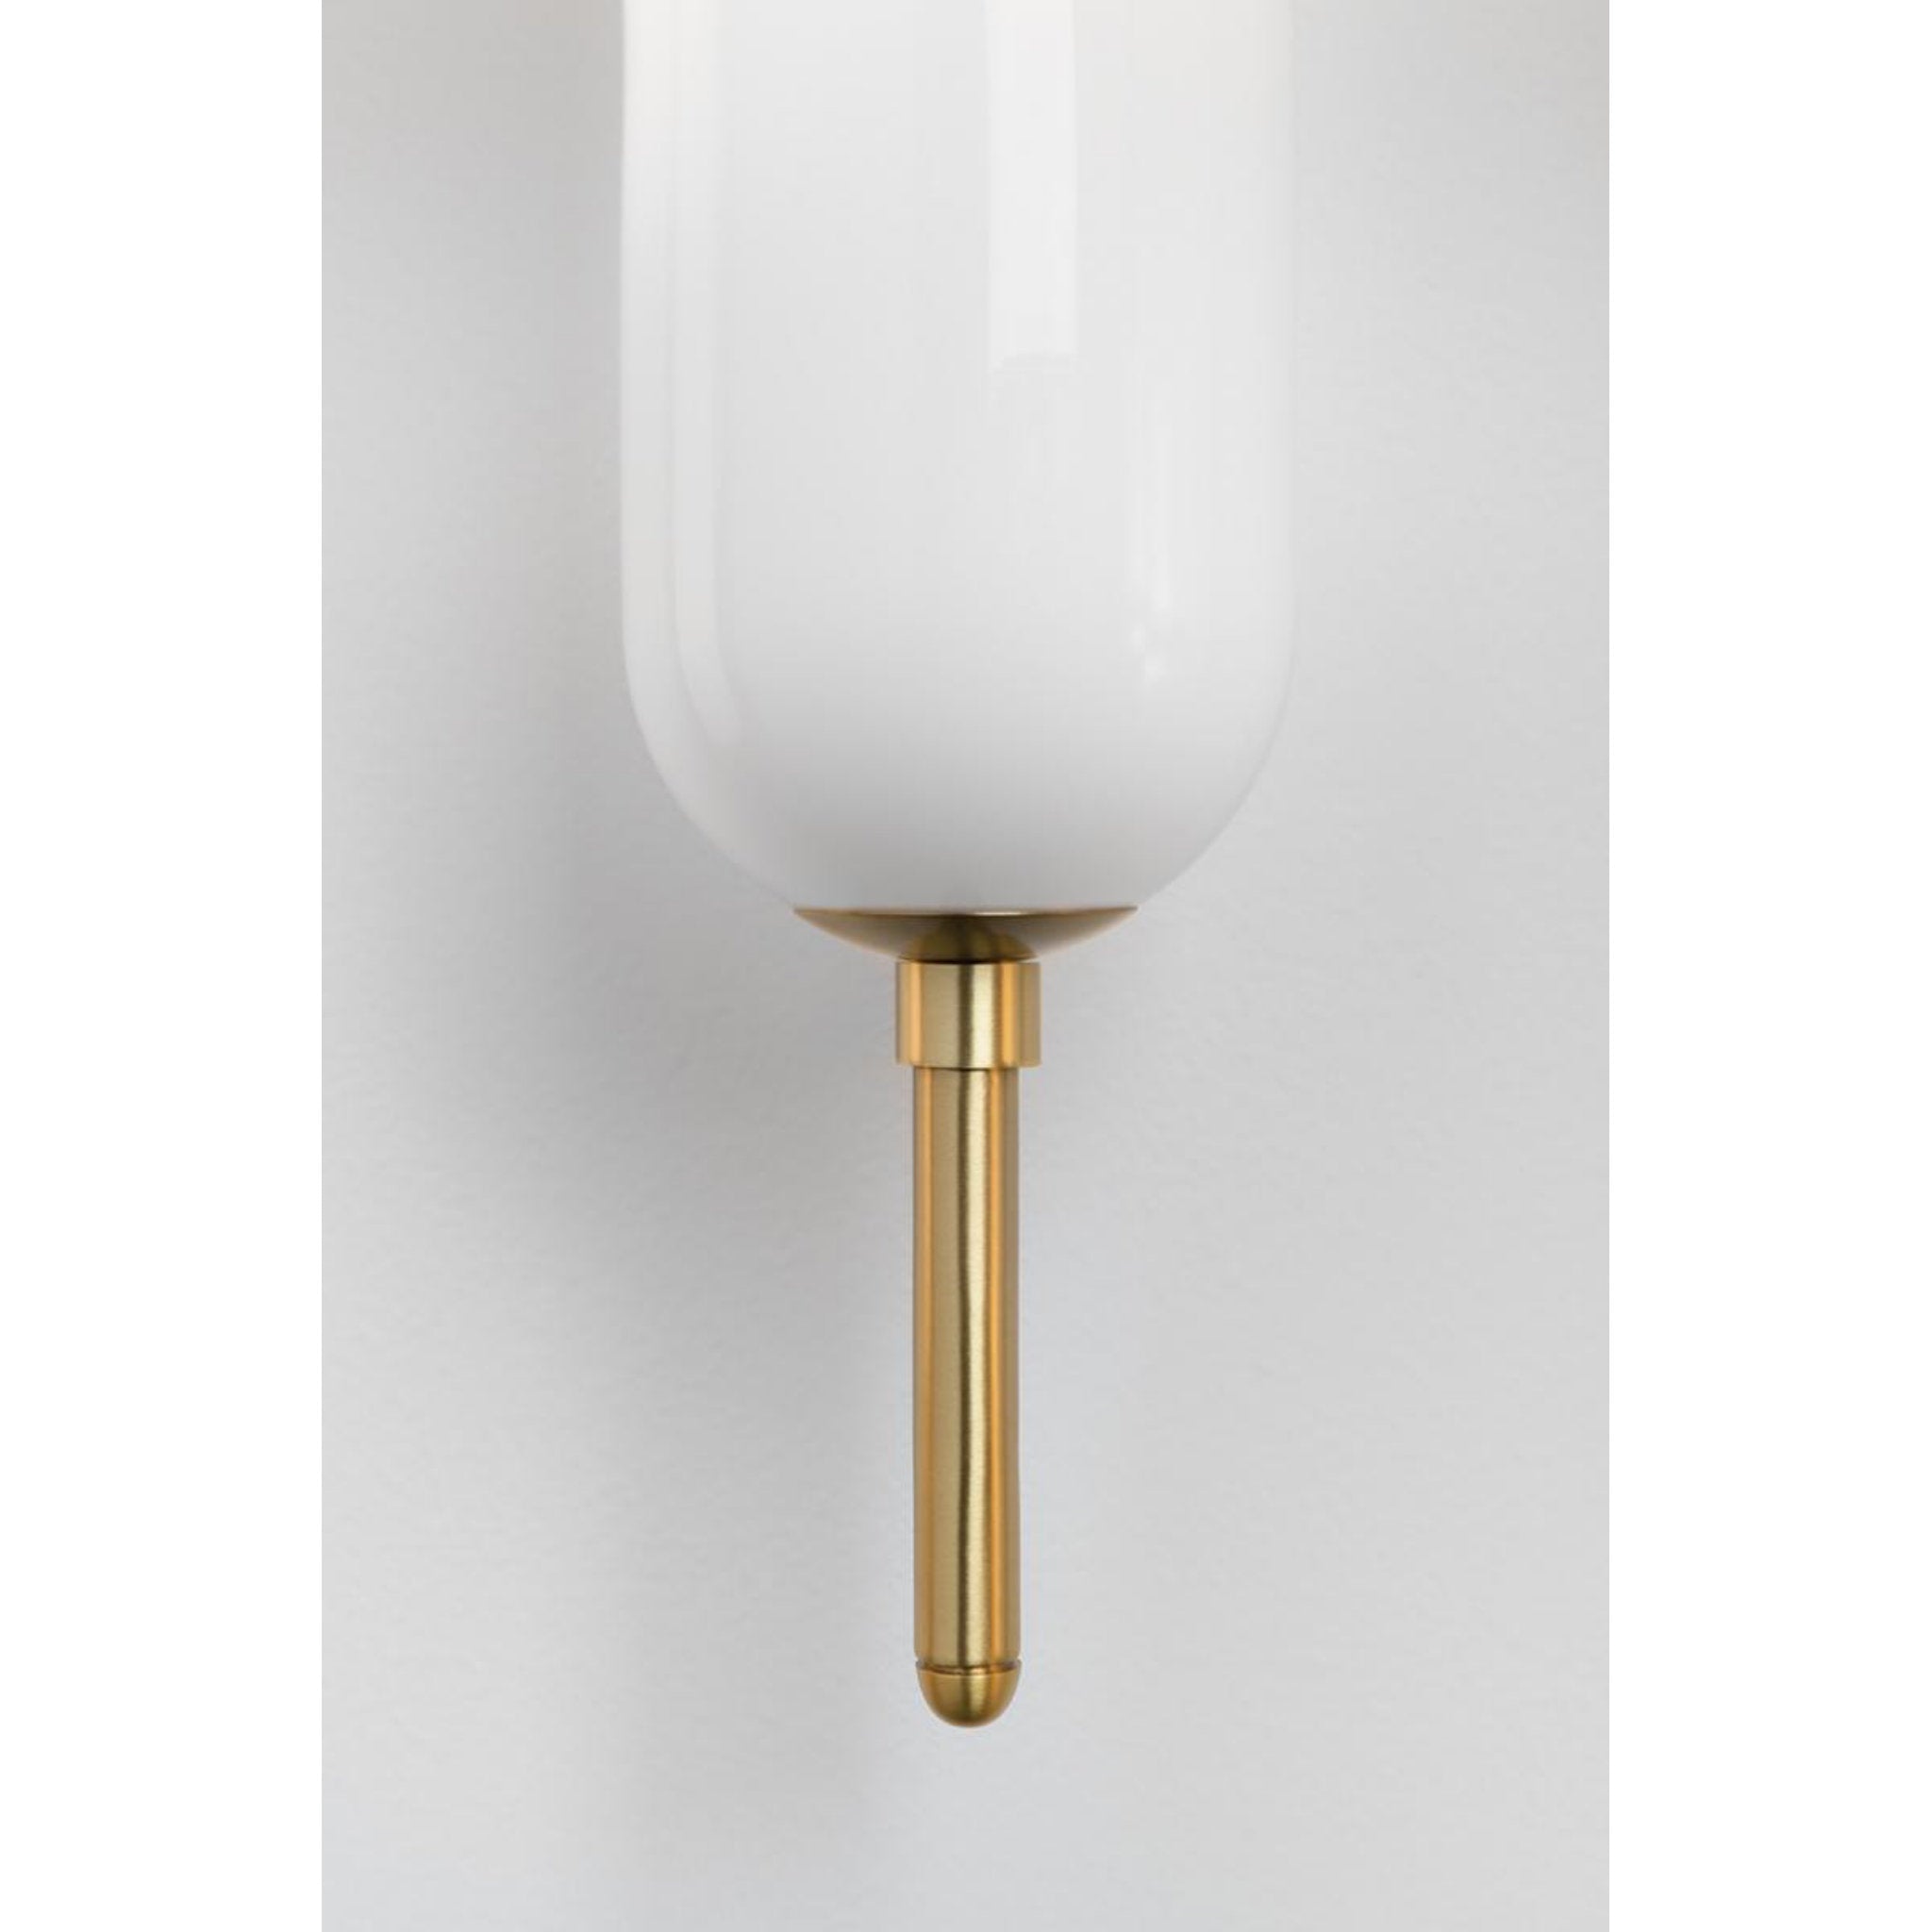 Miley 1-Light Wall Sconce in Old Bronze